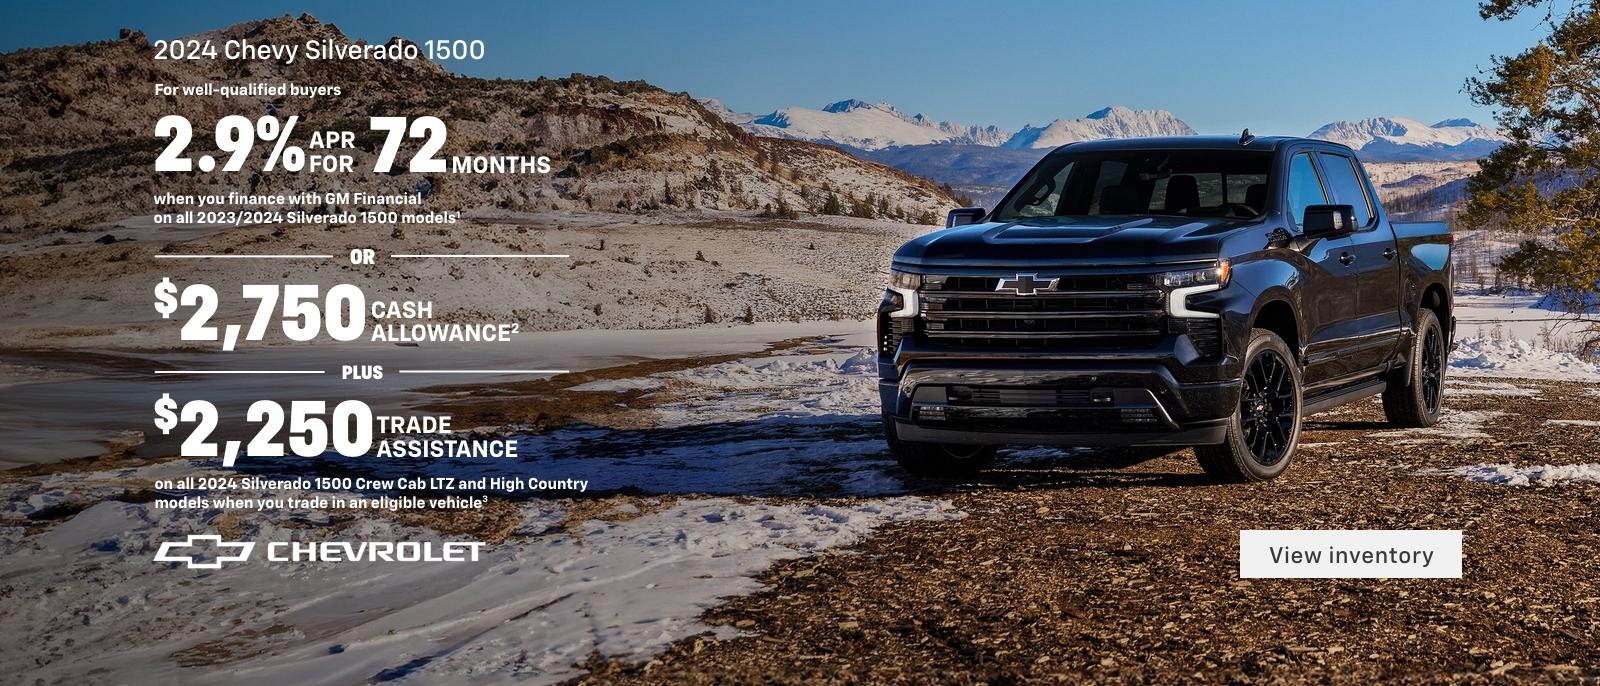 2024 Silverado 1500. For well-qualified buyers 2.9% APR for 72 months when you finance with GM Financial
on all 2024 Silverado 1500 models. Or, $2,750 cash allowance. Plus, $2,250 trade assistance on all 2024 Silverado 1500 Crew Cab LTZ & High Country models when you trade in an eligible vehicle